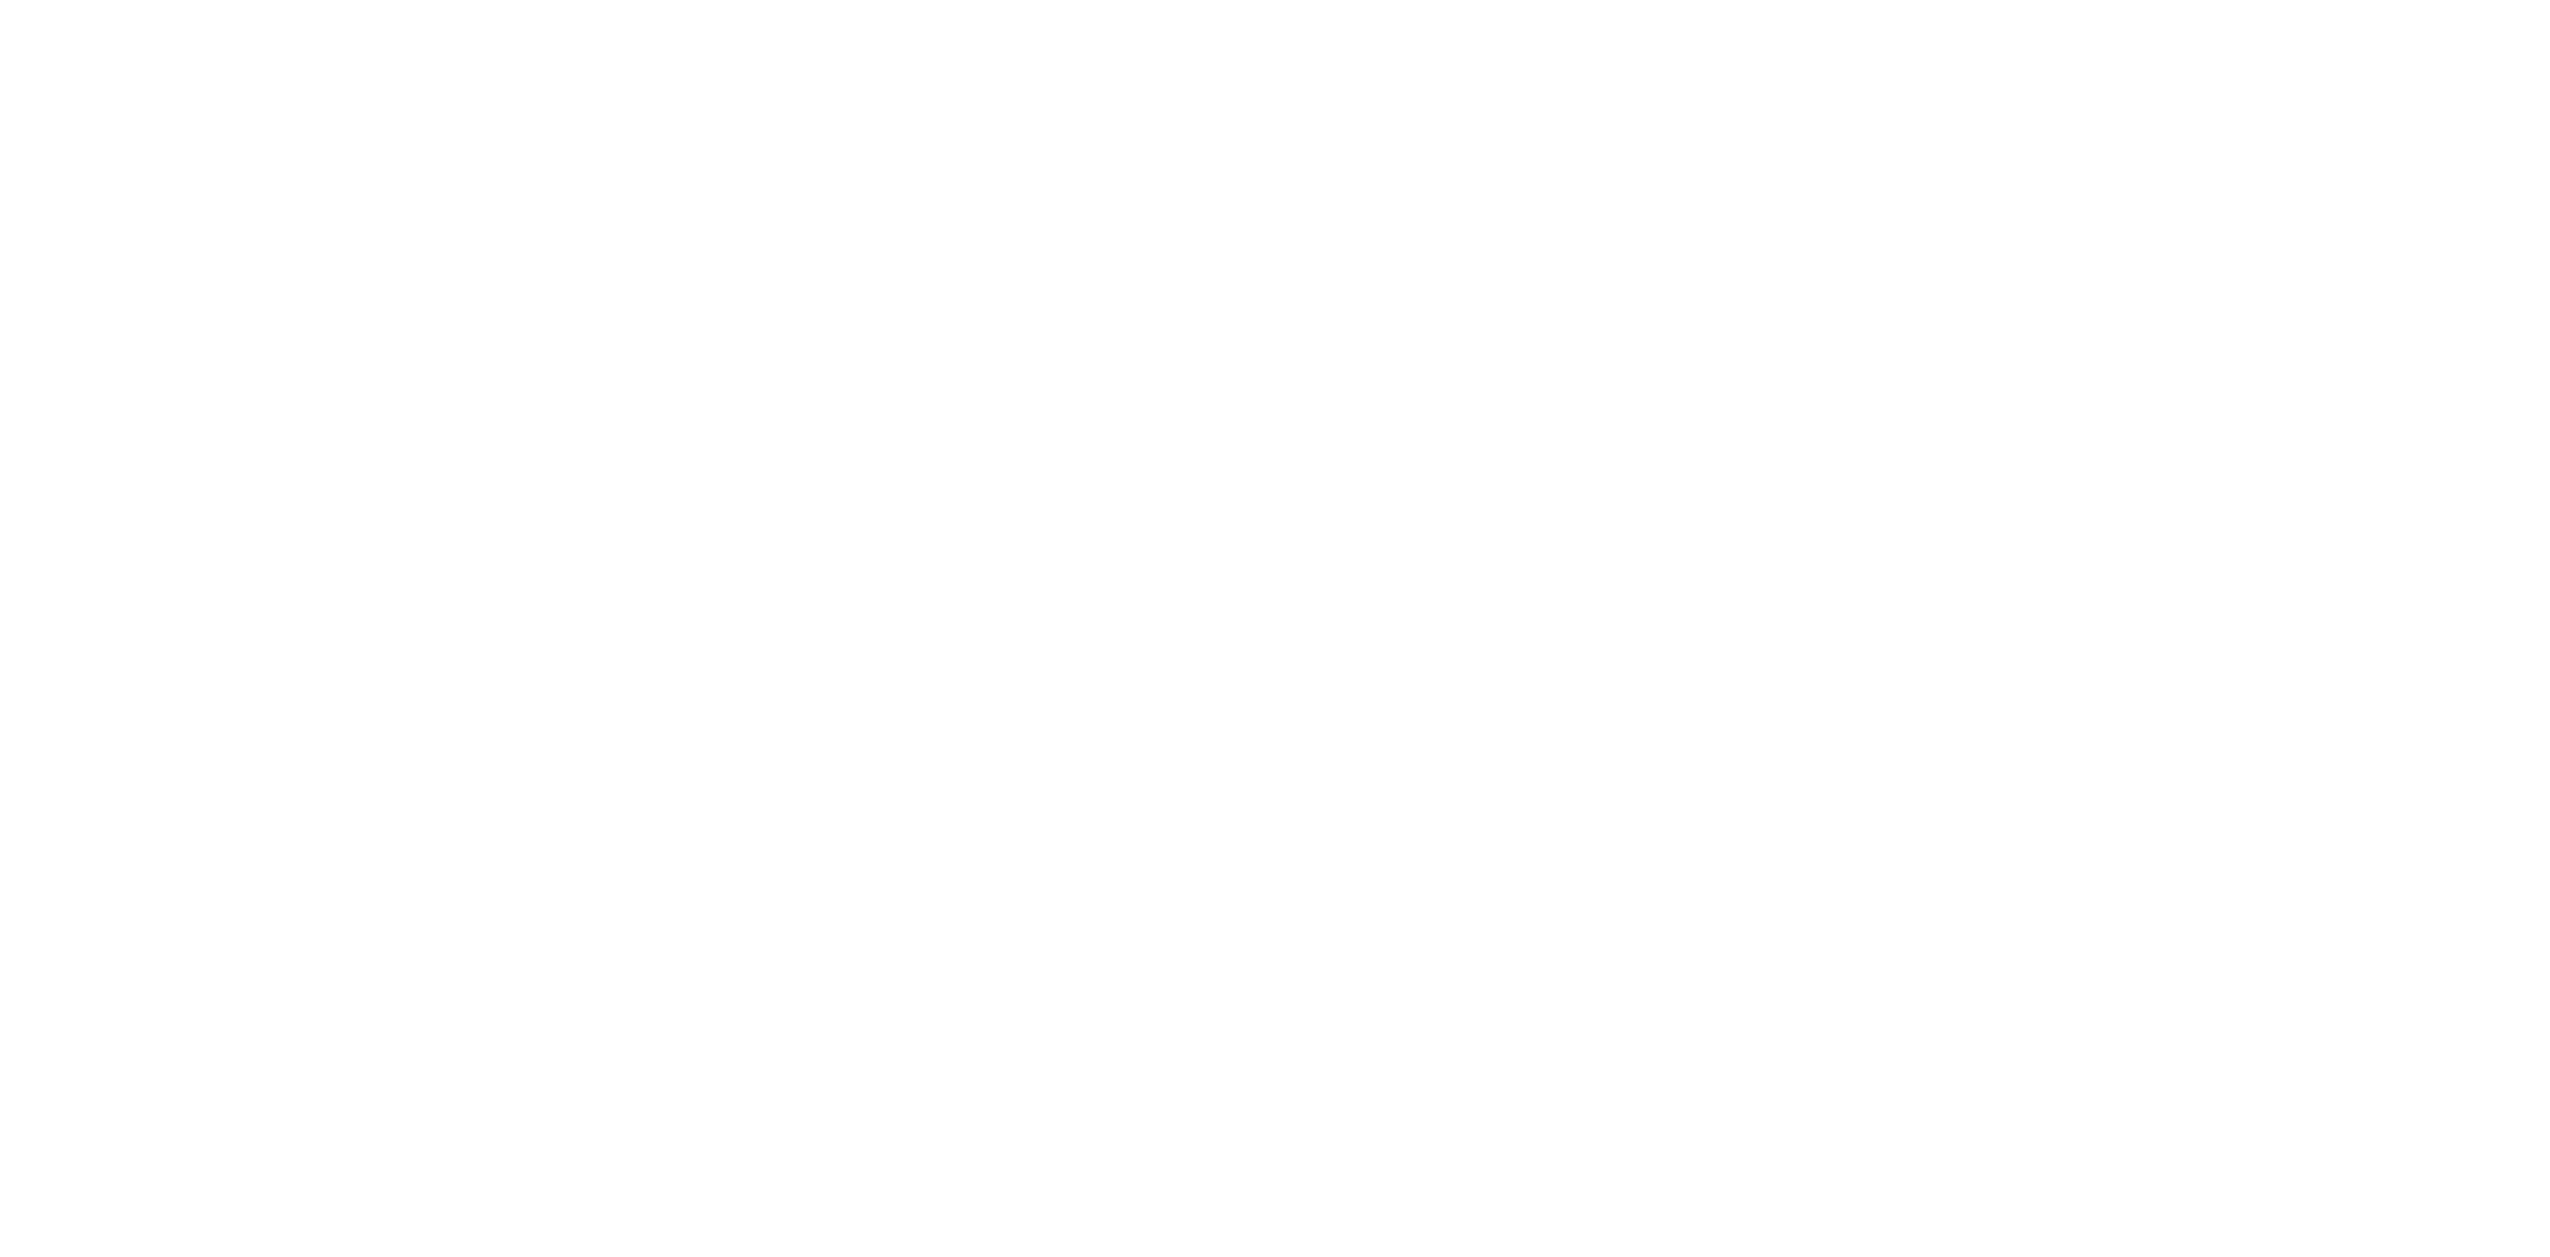 PNFP Real Estate Capital Markets